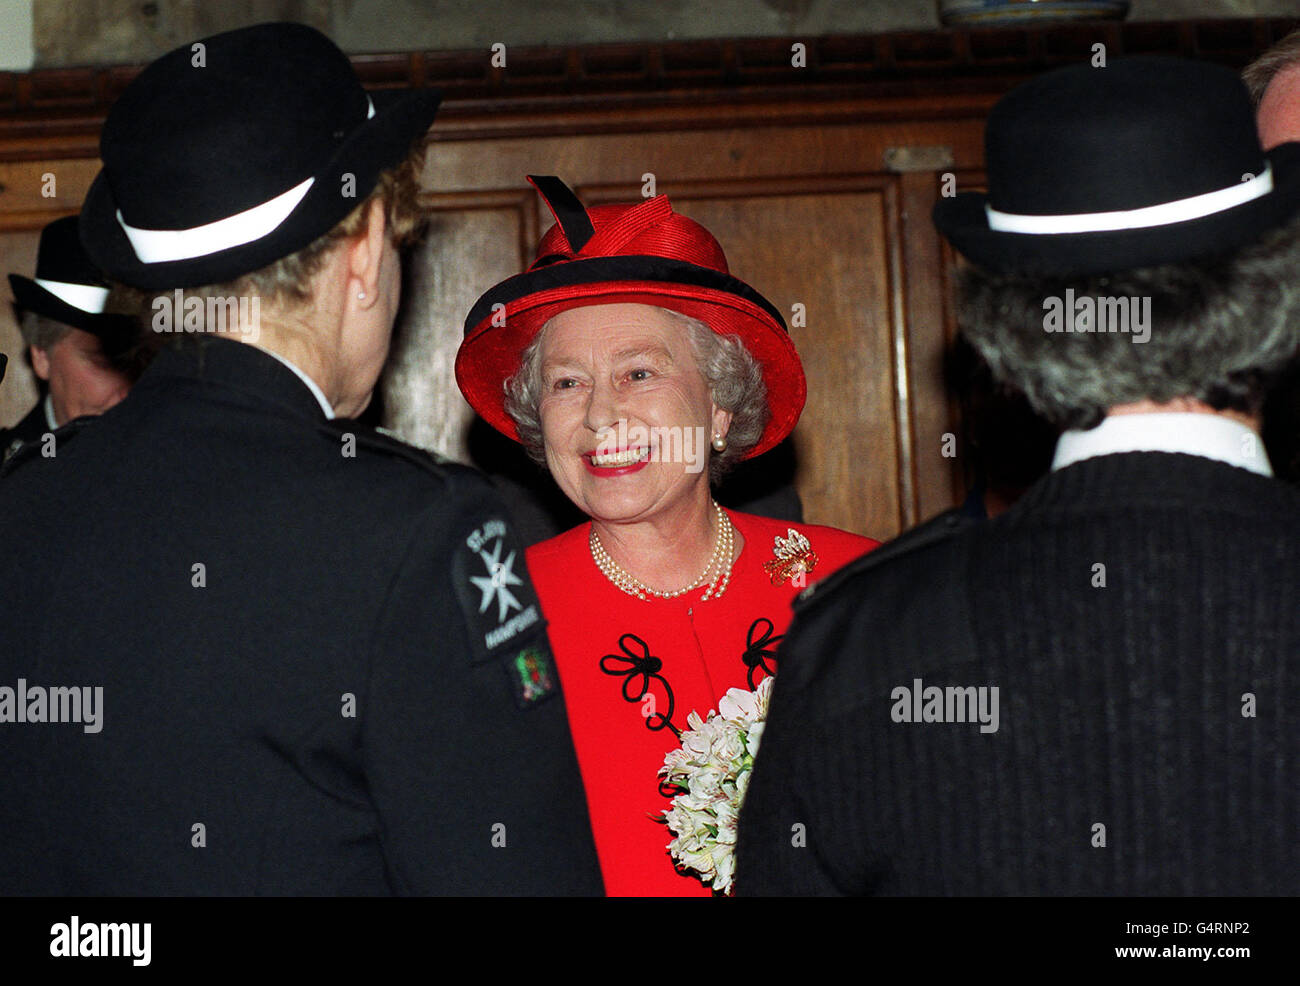 Her Majesty the Queen pays tribute to St Johns Ambulance volunteers, as she marked the 900th anniversary of the Order of St John at their headquarters in Clerkenwell, central London. Stock Photo